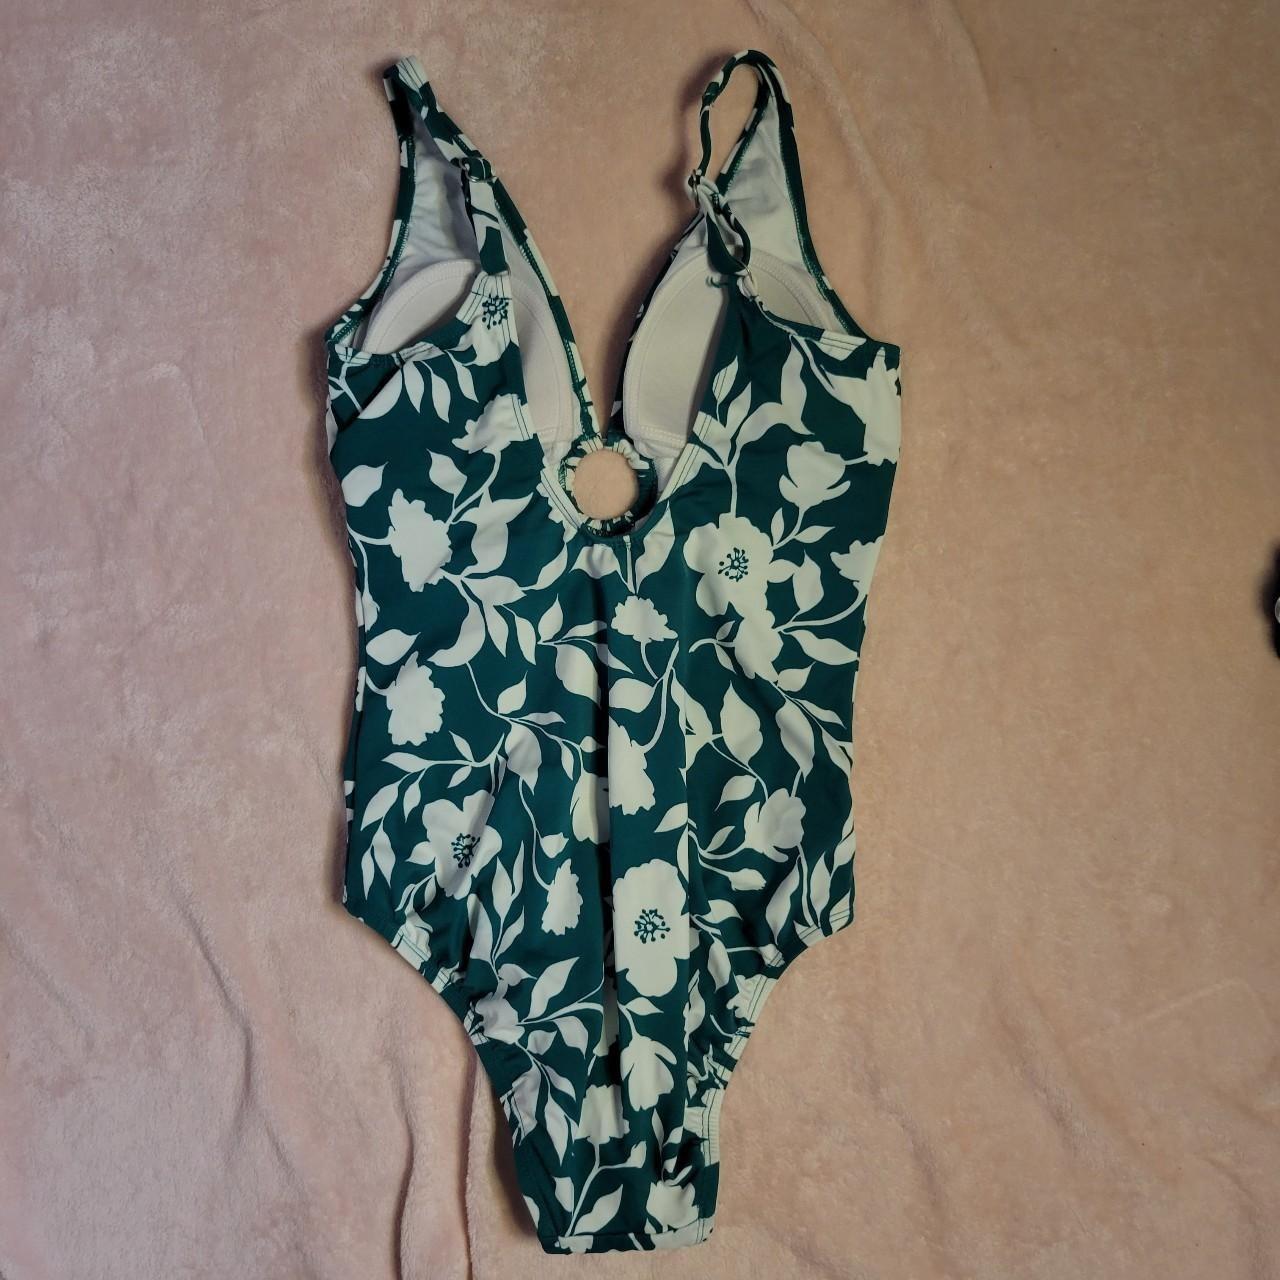 Product Image 3 - LISTING FOR TWO SWIMSUITS 

1